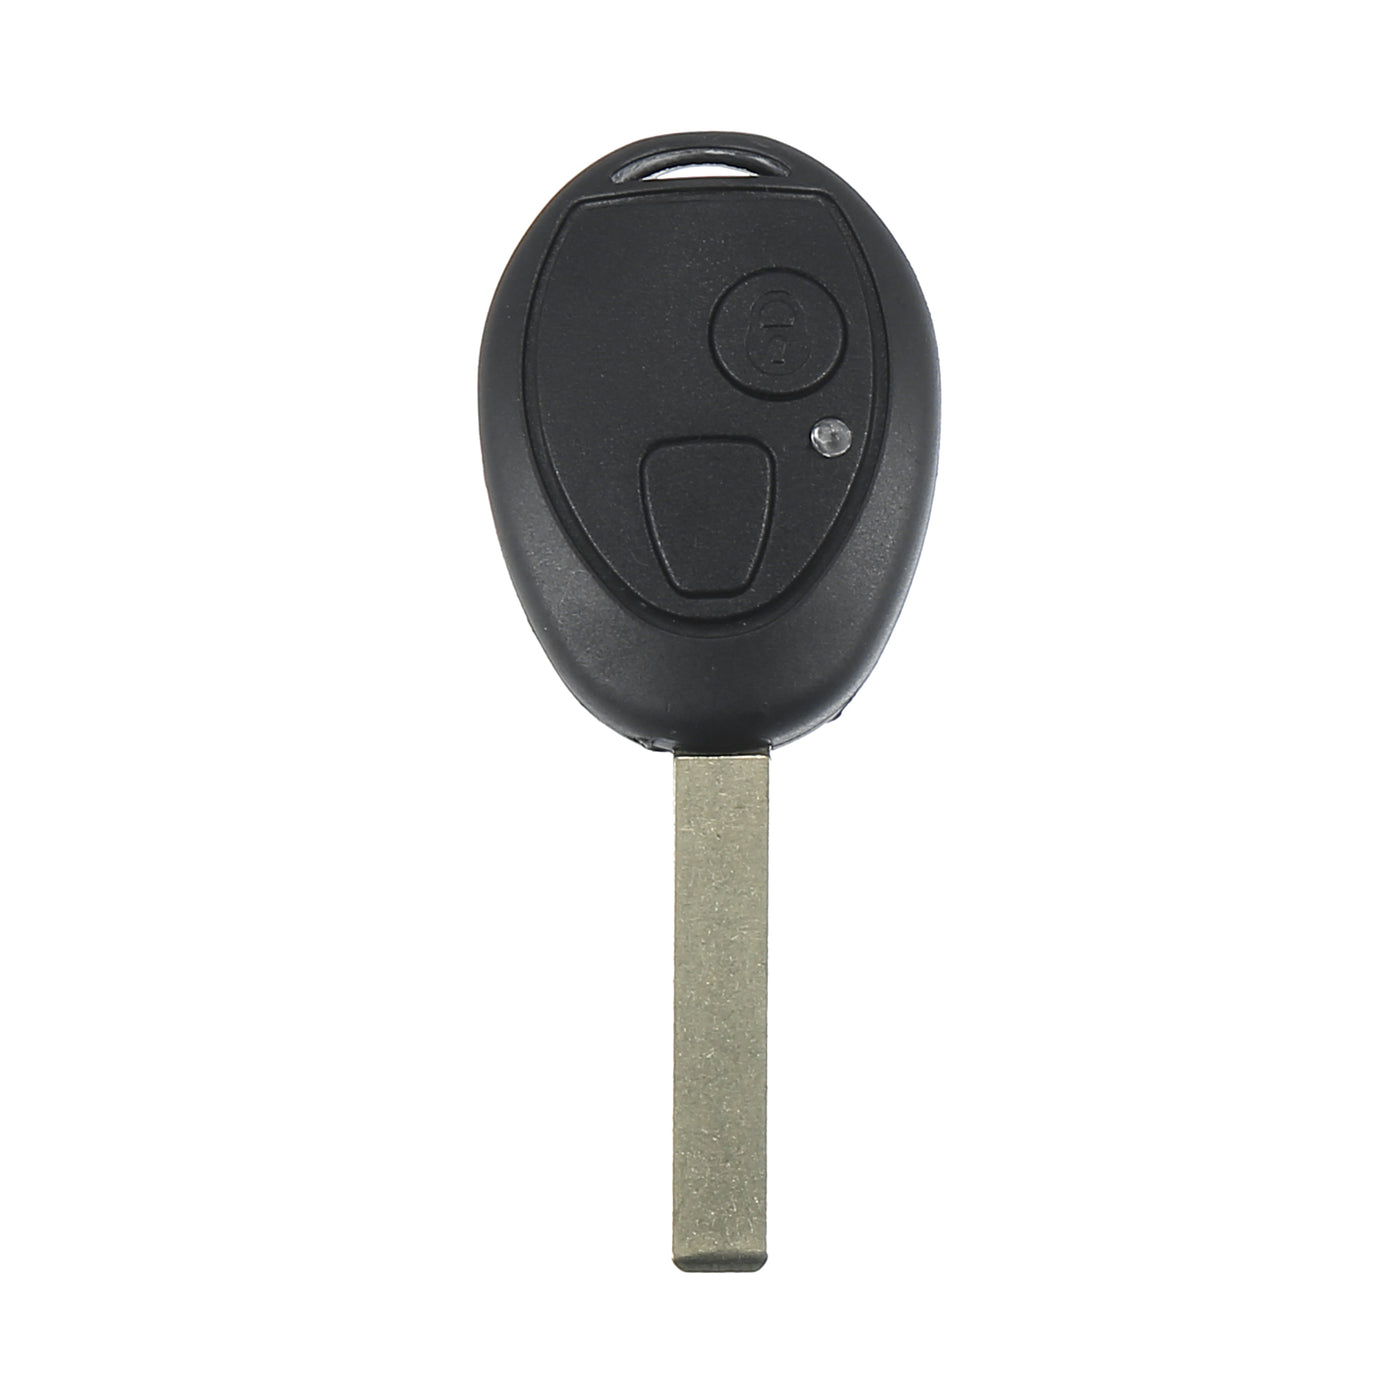 X AUTOHAUX 315MHz PCF7931AS Replacement Smart Proximity Keyless Entry Remote Key Fob for Mini Cooper 2002-2005 for Mini ZT 2001-2005 for Rover 75 1998-2005 2 Buttons